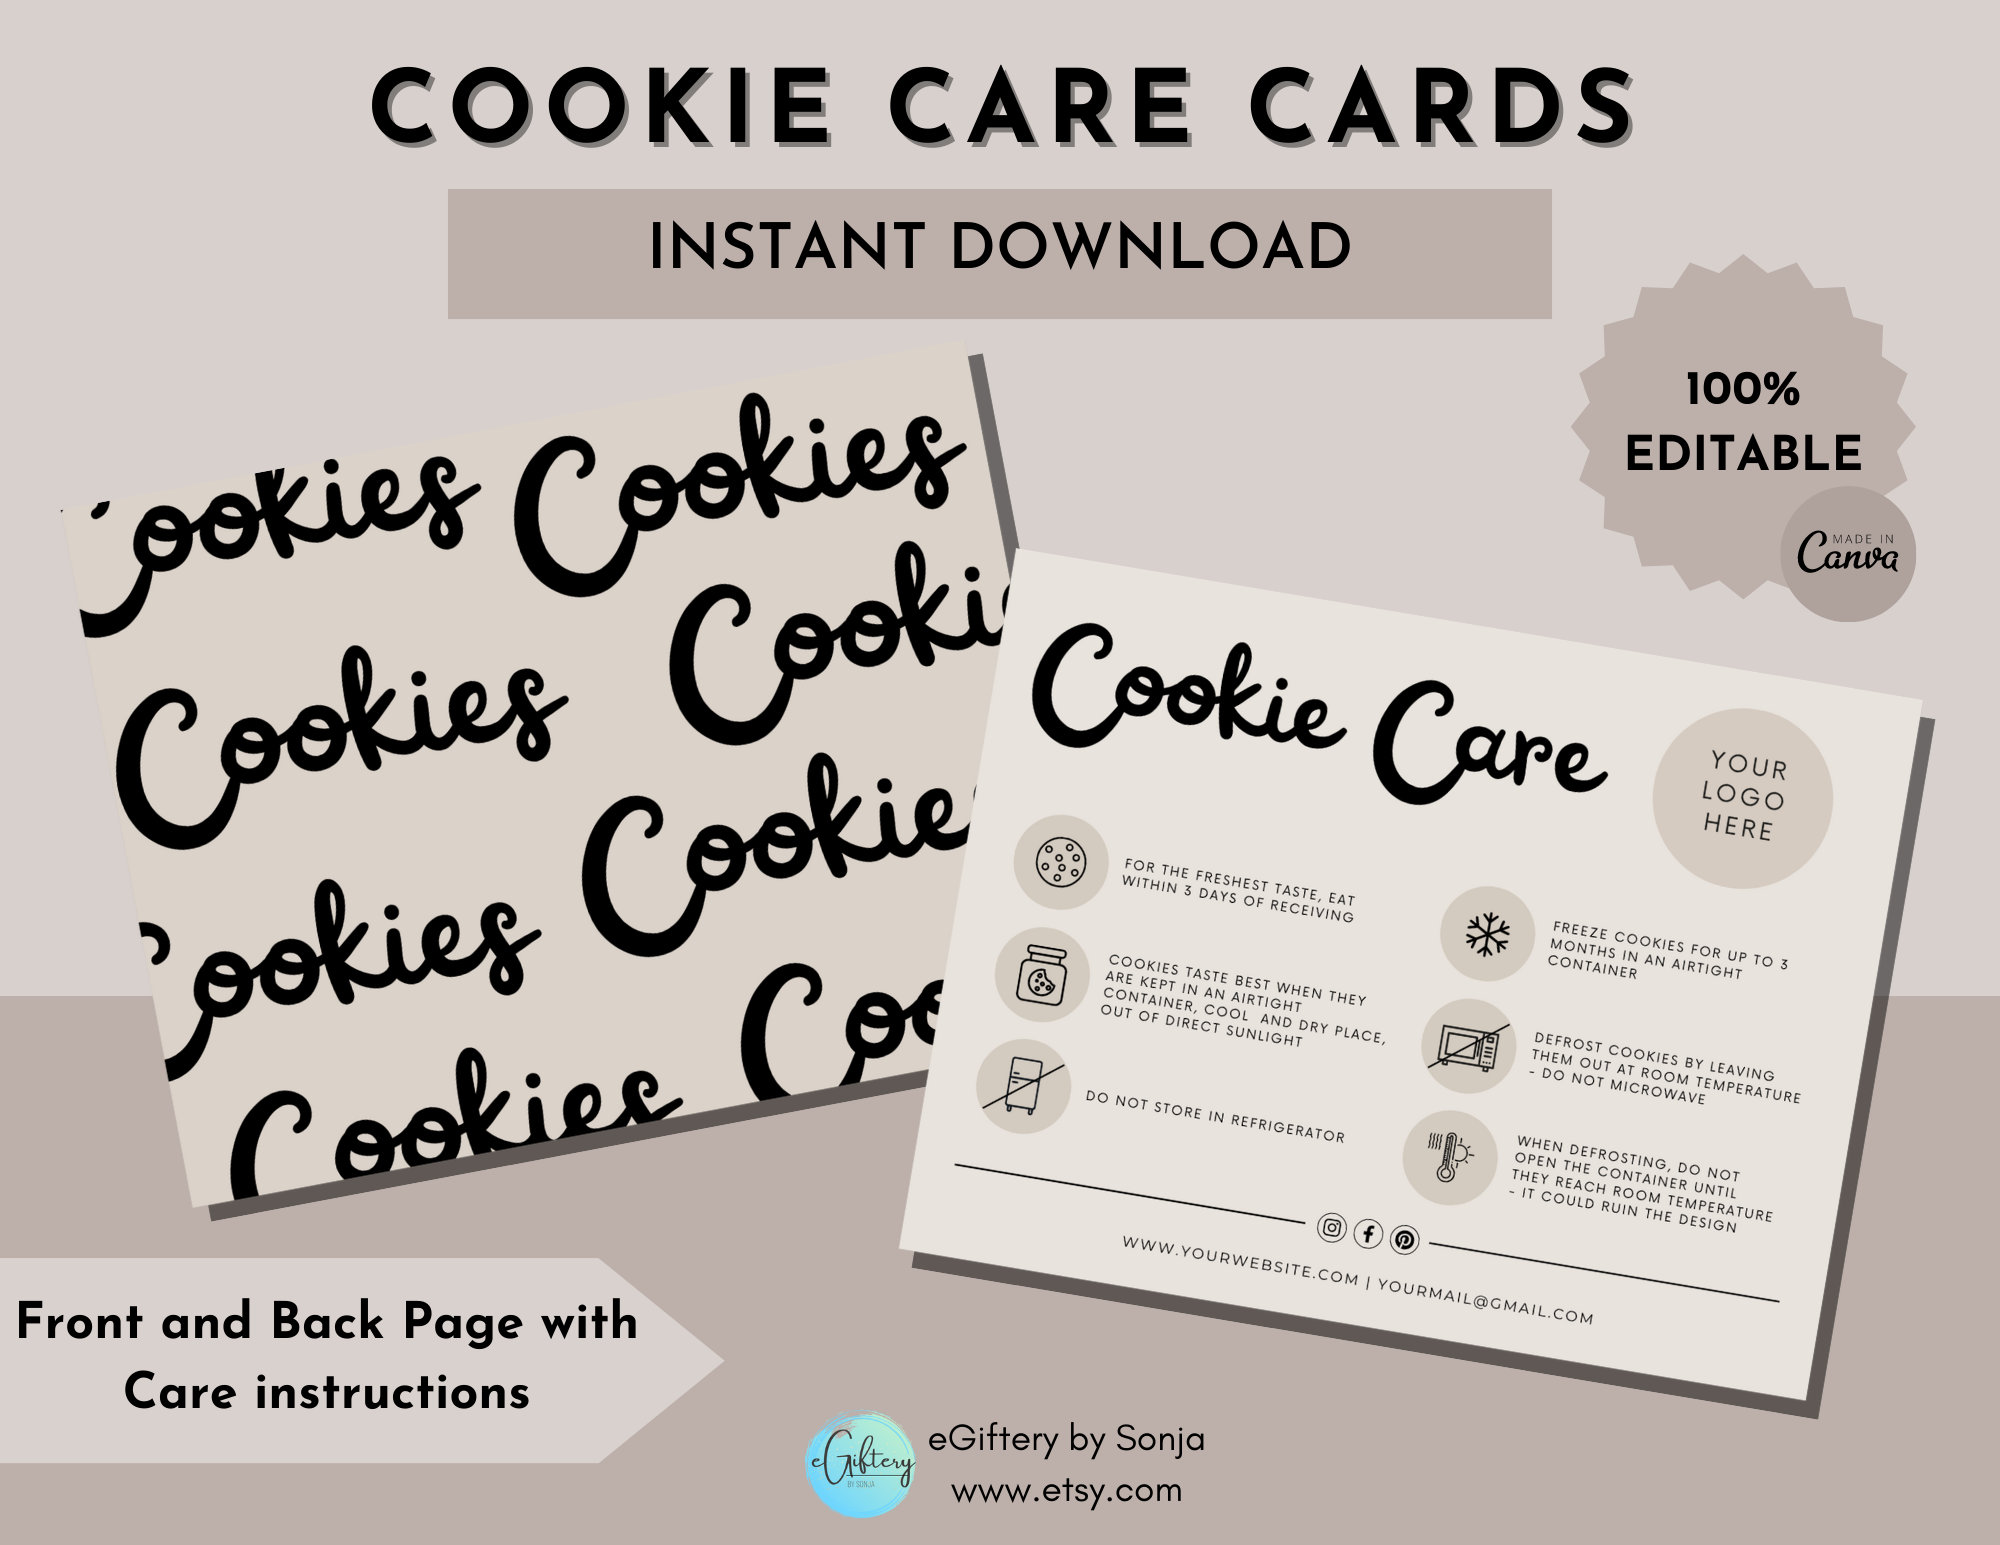 Printable Mug Care Instructions, Cup Care Cards, Vinyl Products